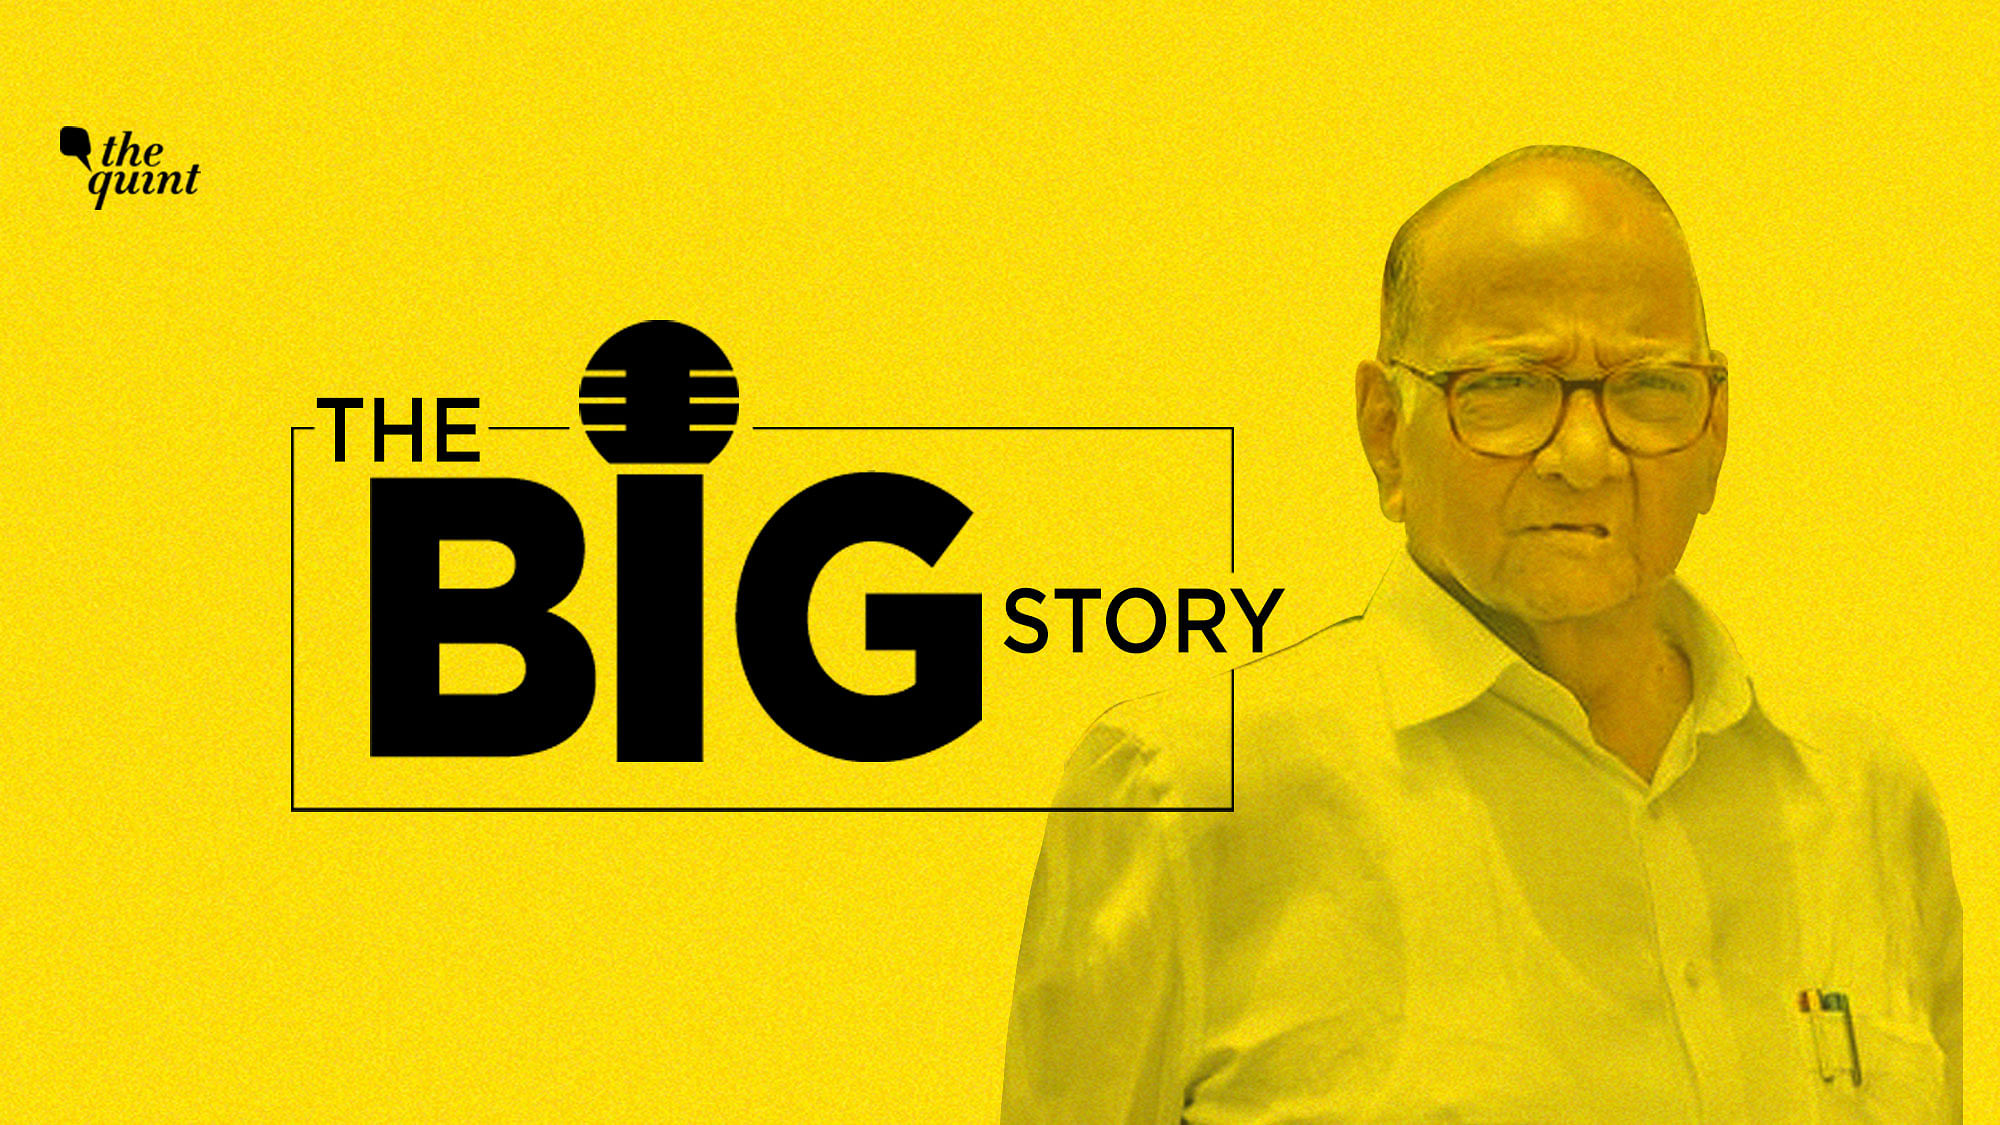 Today we discuss the man who had become Maharashtra’s youngest Chief Minister at the age of 38, the one who founded the NCP in 1999, and the one who’s often called the Maratha Strongman – Sharad Pawar.